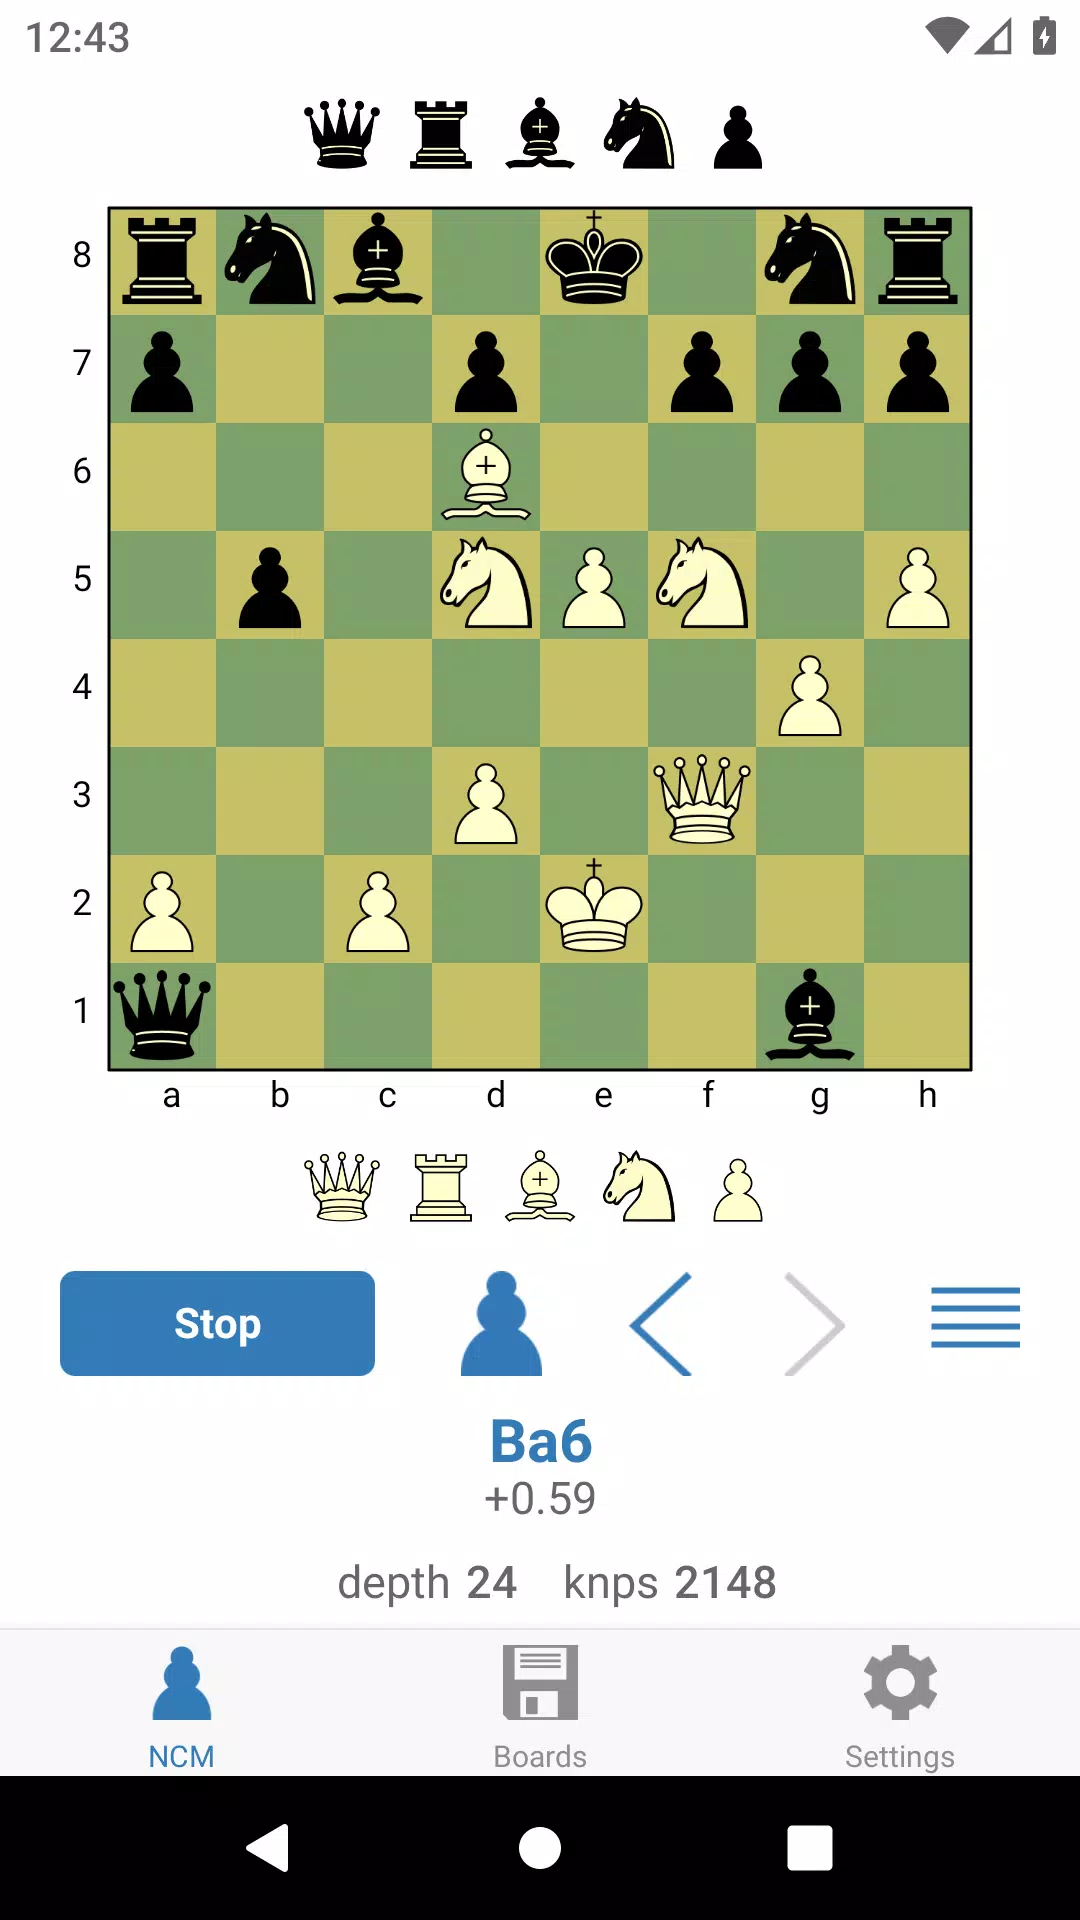 Next Chess Move APK (Android Game) - Free Download